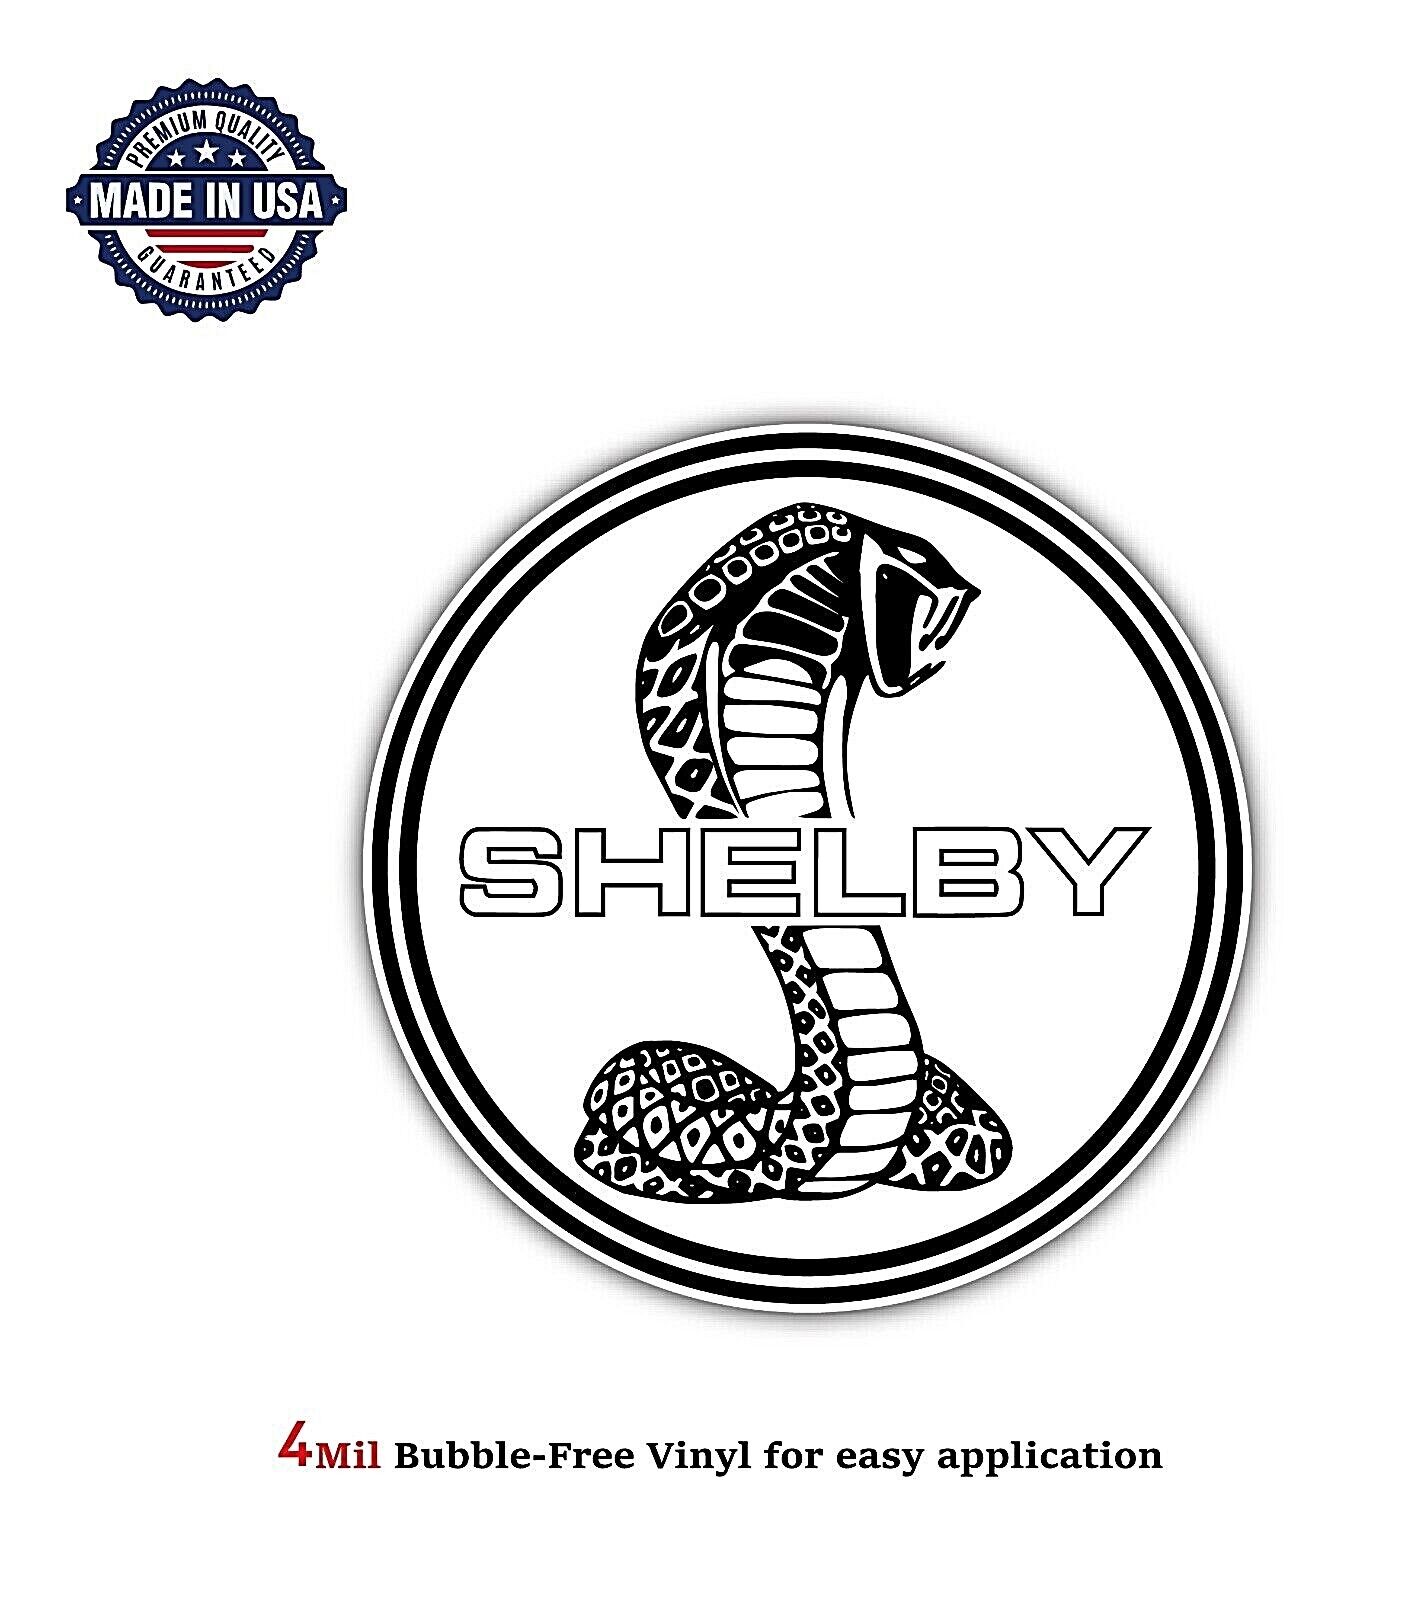 SHELBY COBRA FORD VINYL DECAL STICKER CAR TRUCK BUMPER 4MIL BUBBLE FREE US MADE